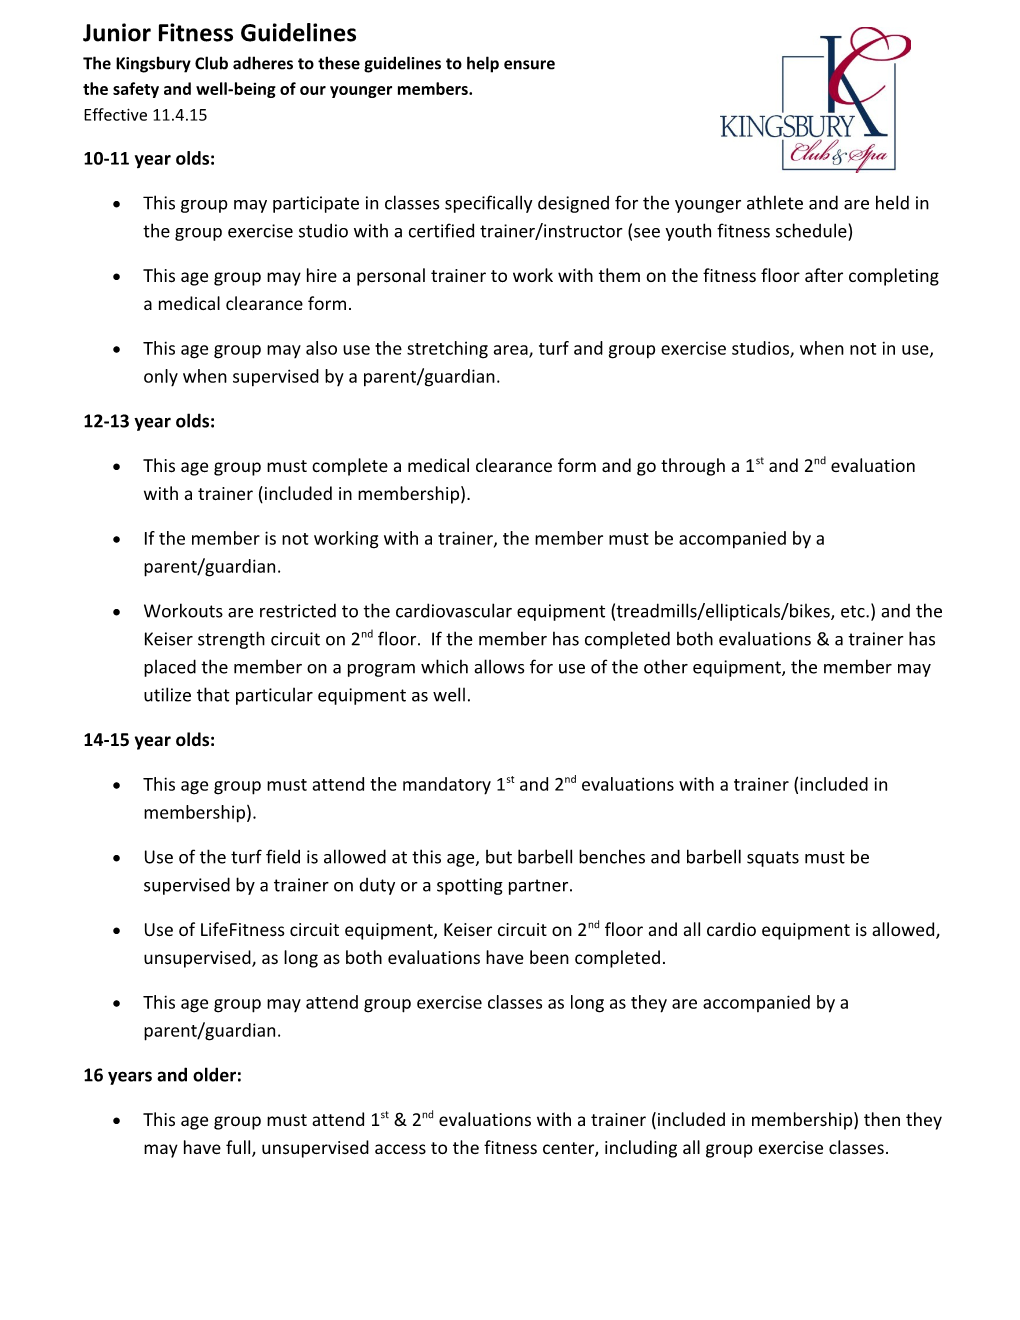 Junior Fitness Guidelines the Kingsbury Club Adheres to These Guidelines to Help Ensure